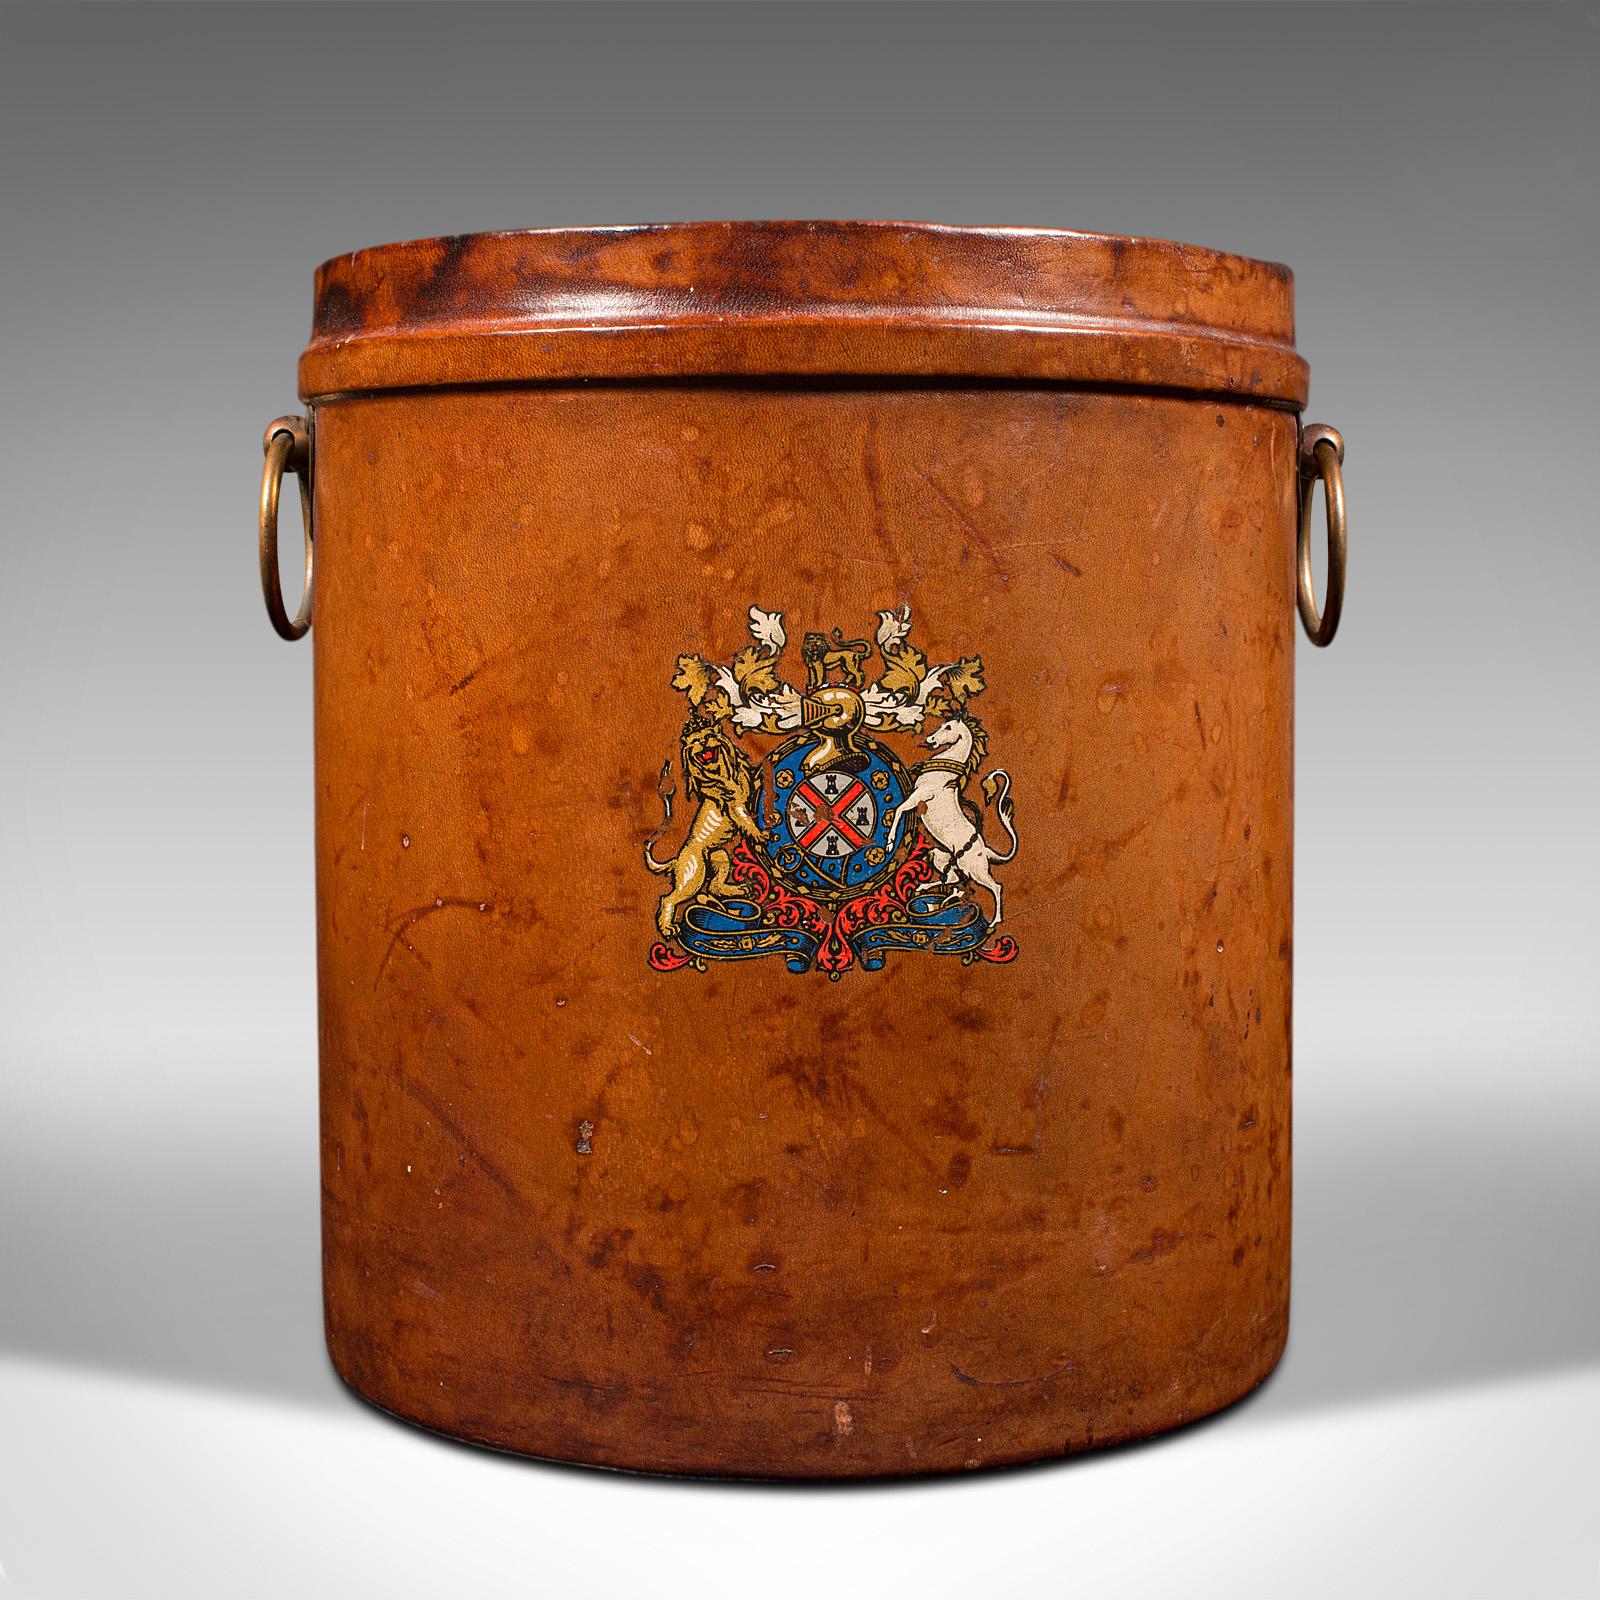 This is an antique storage bin. An English, leather and brass bucket or store, dating to the late Victorian period, circa 1900.

Presents a colourful, and pleasingly weathered antique appeal
Displays a desirable aged patina throughout
Leather bound